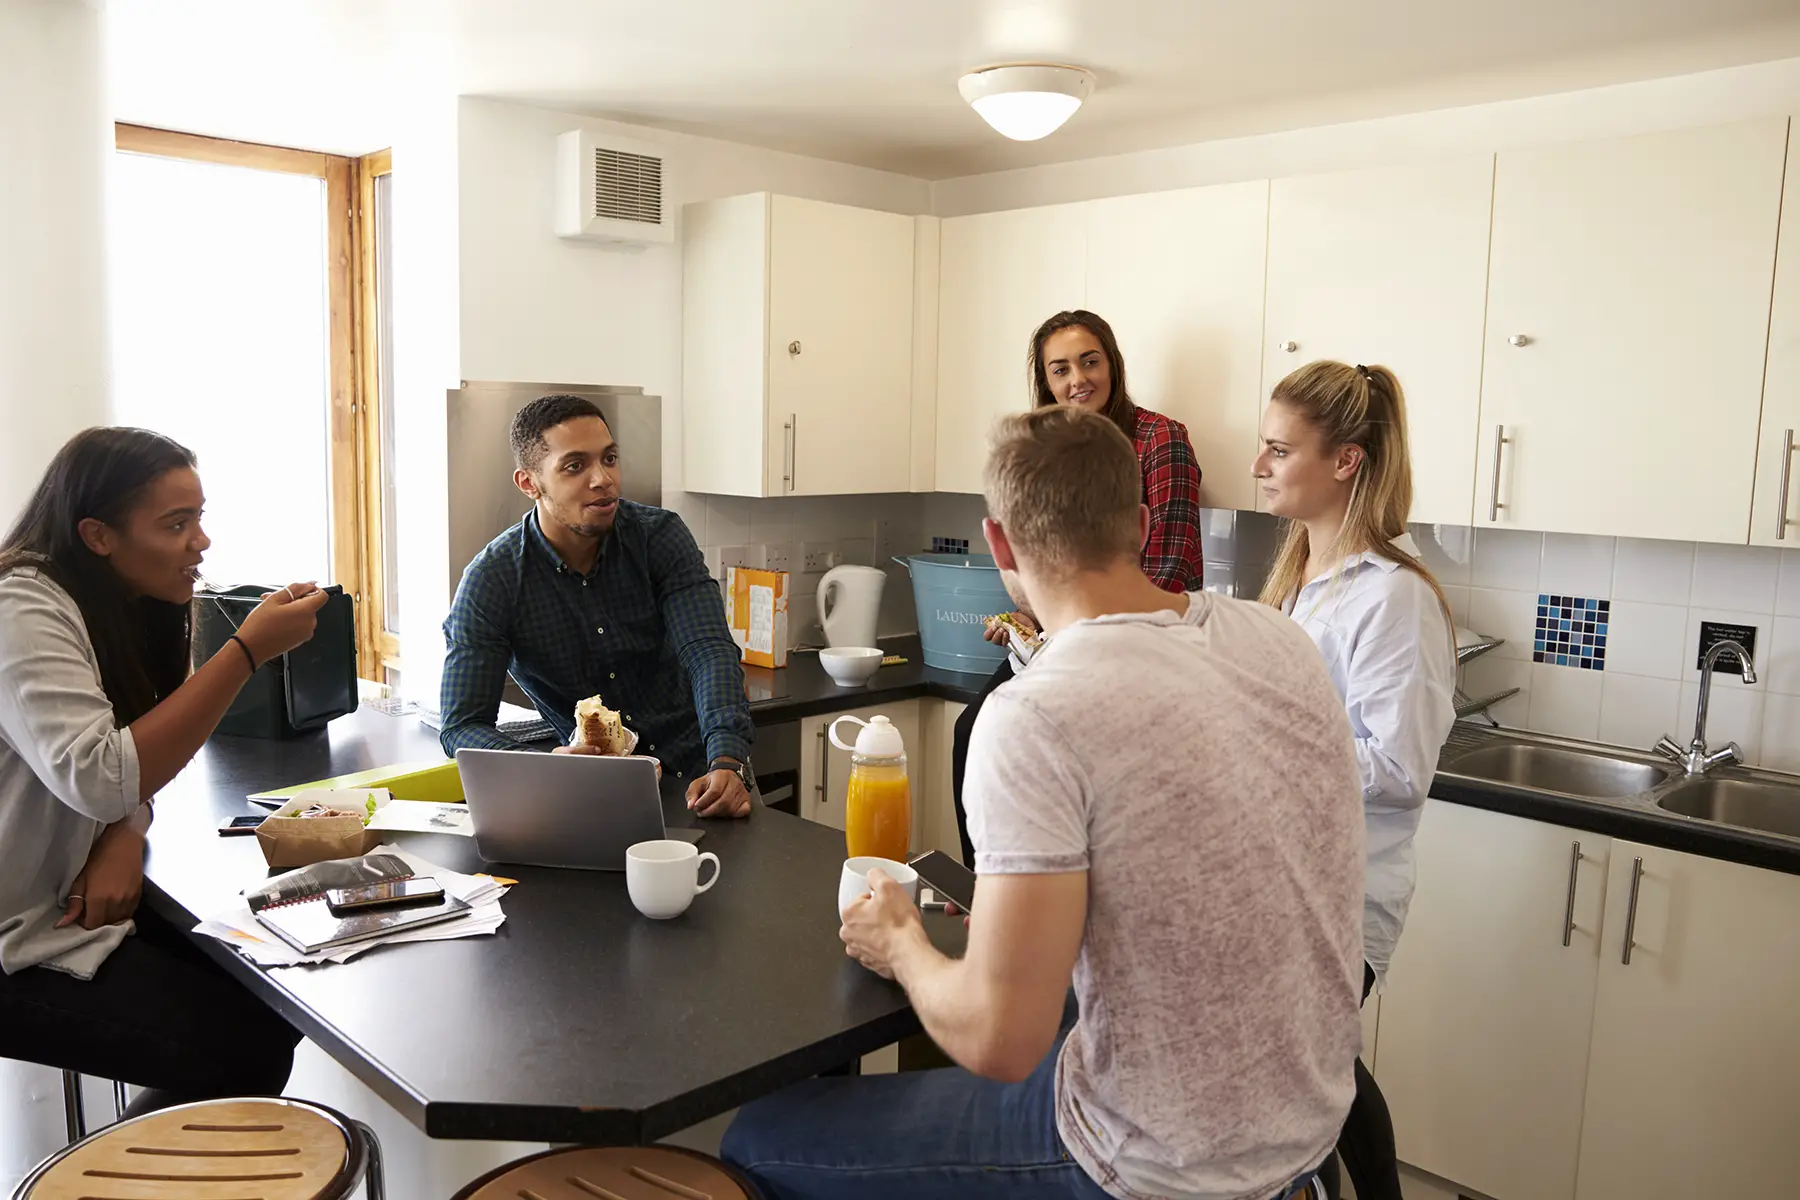 Young people in a shared kitchen